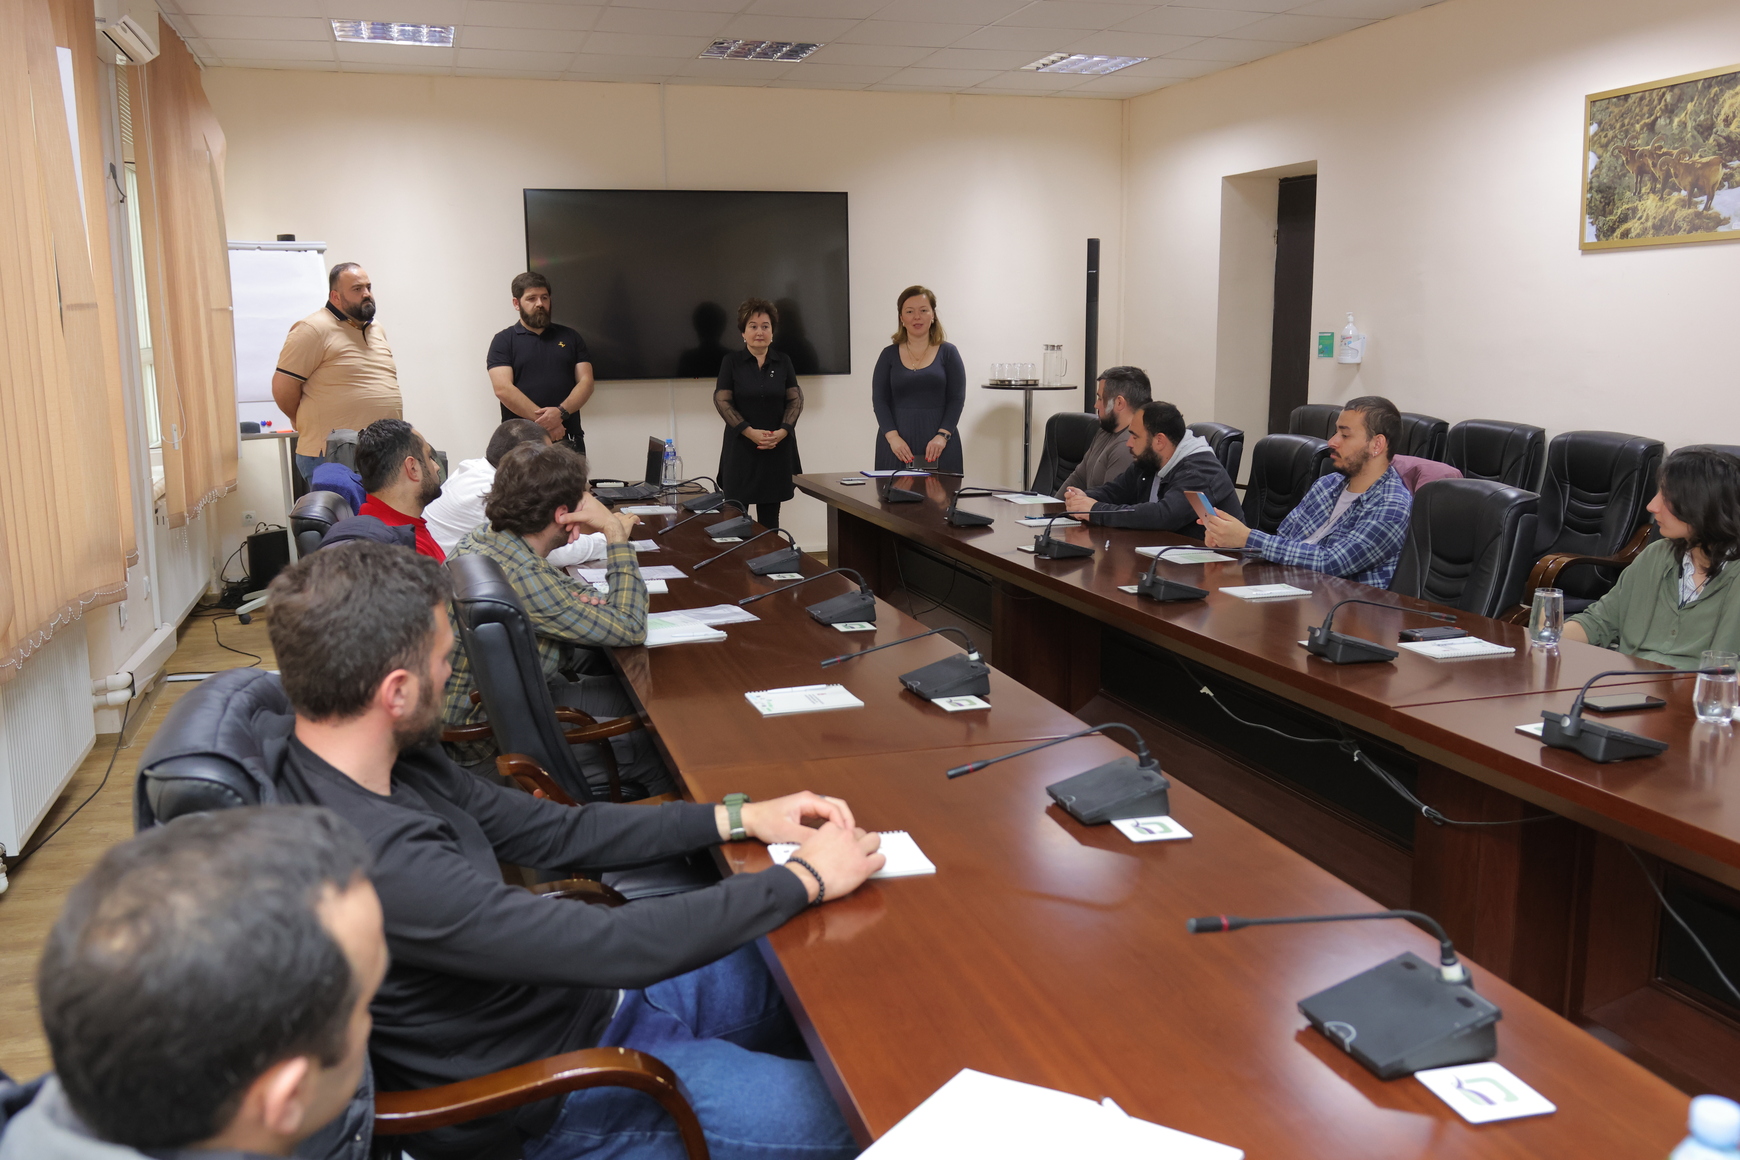 The training process for the vocational training program "Forest Inventory and Taxation" has started